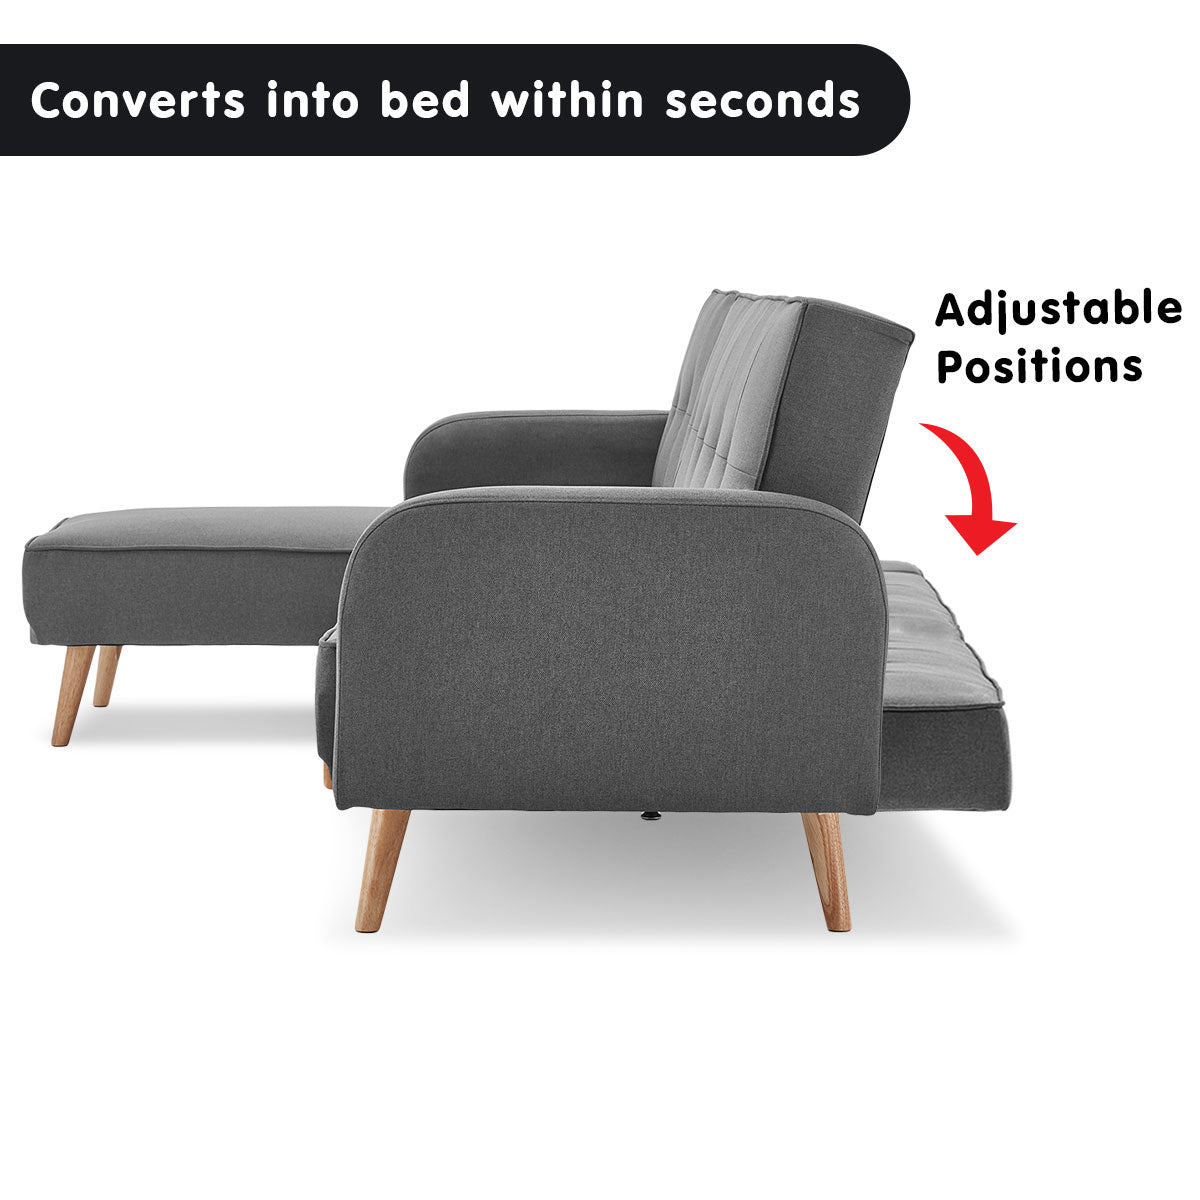 3-Seater Corner Sofa Bed with Chaise Lounge - Dark Grey